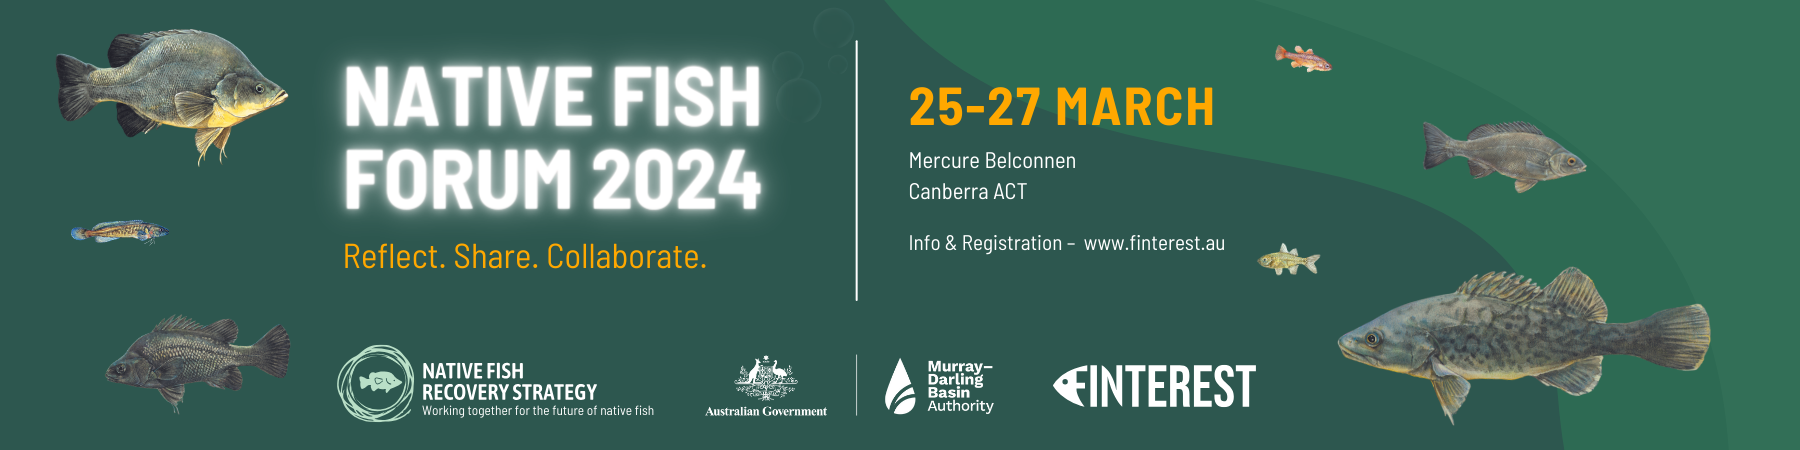 Native Fish Forum 2024, 25-28 March at Mercure Belconnen, Canberra ACT. Reflect, Share, Collaborate.